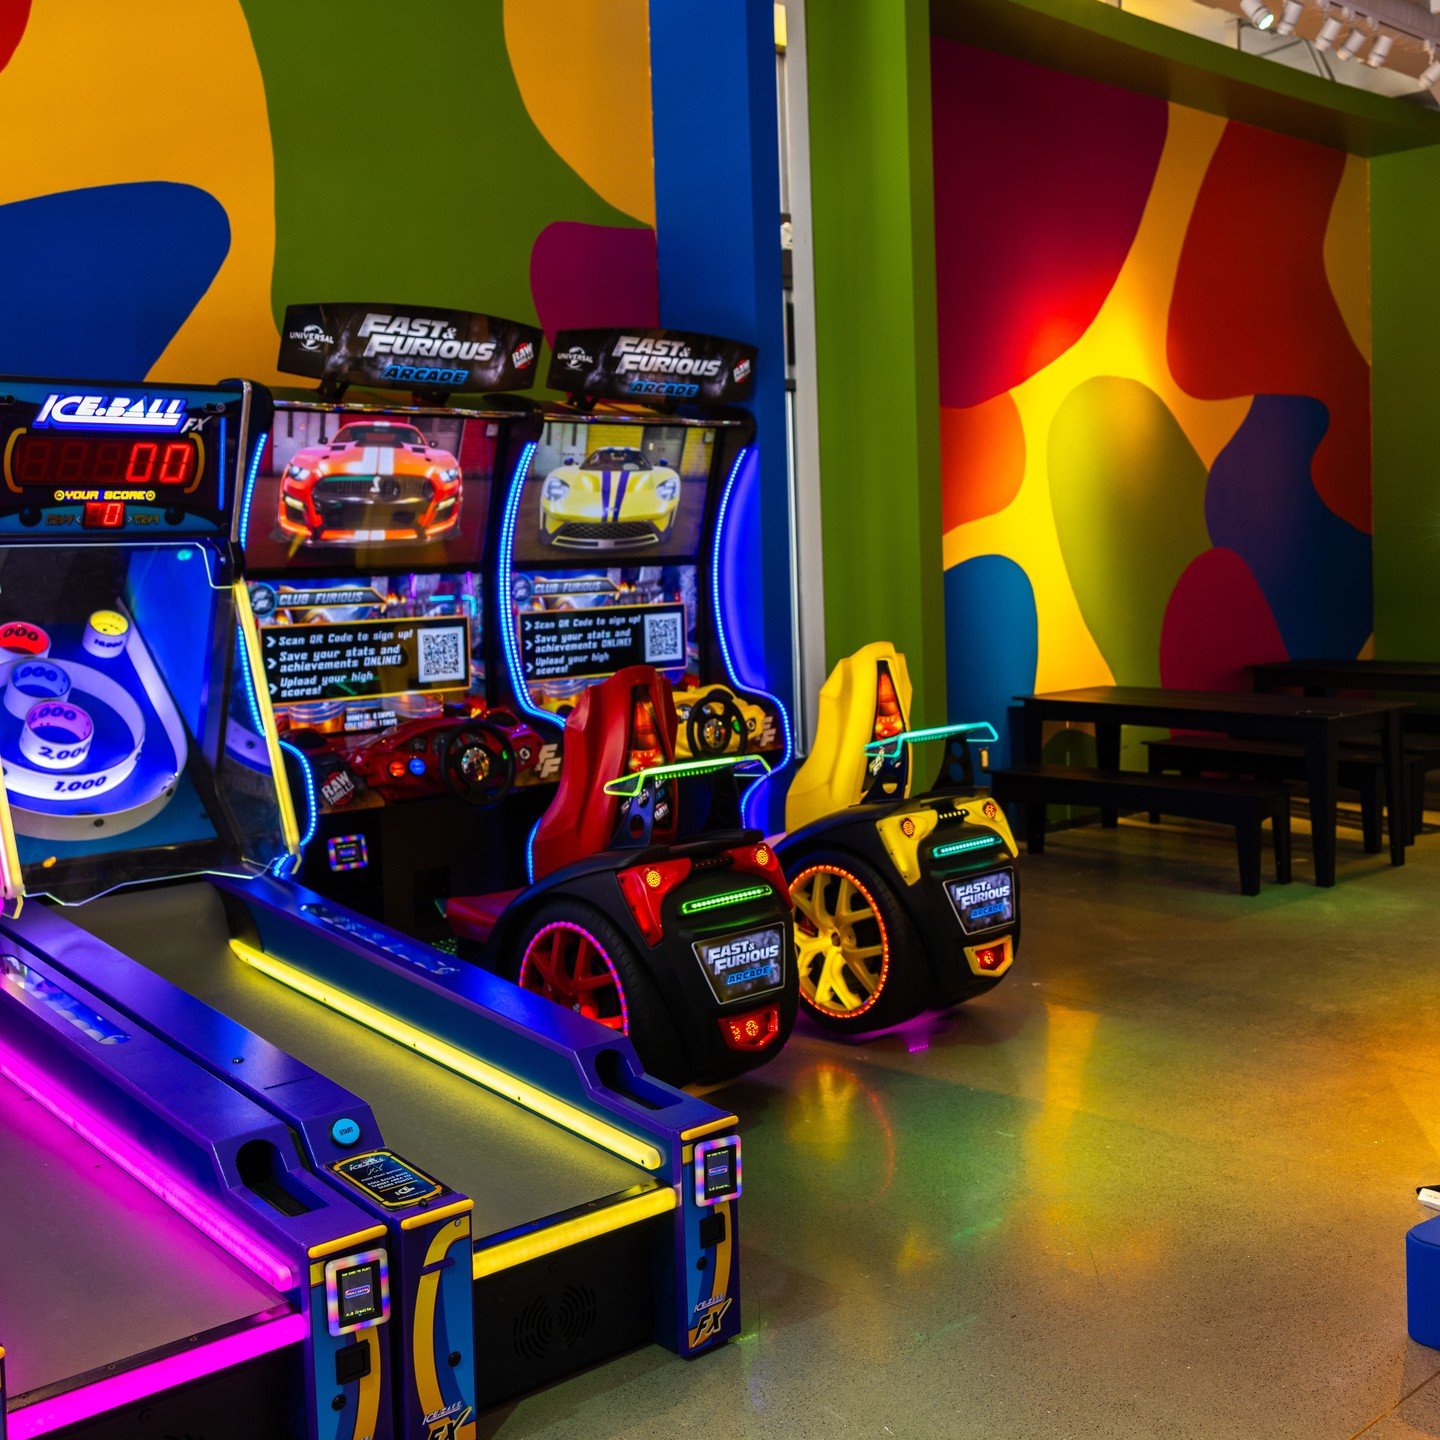 Hit Woodward Avenue to take on games, roller-skating, and to create your own music with a light show this weekend! Be sure to stop by Next level and Remix Detroit and enjoy all the family-friendly fun 🛼 

📍 Next Level: 1201 Woodward Ave 
📍 Remix D